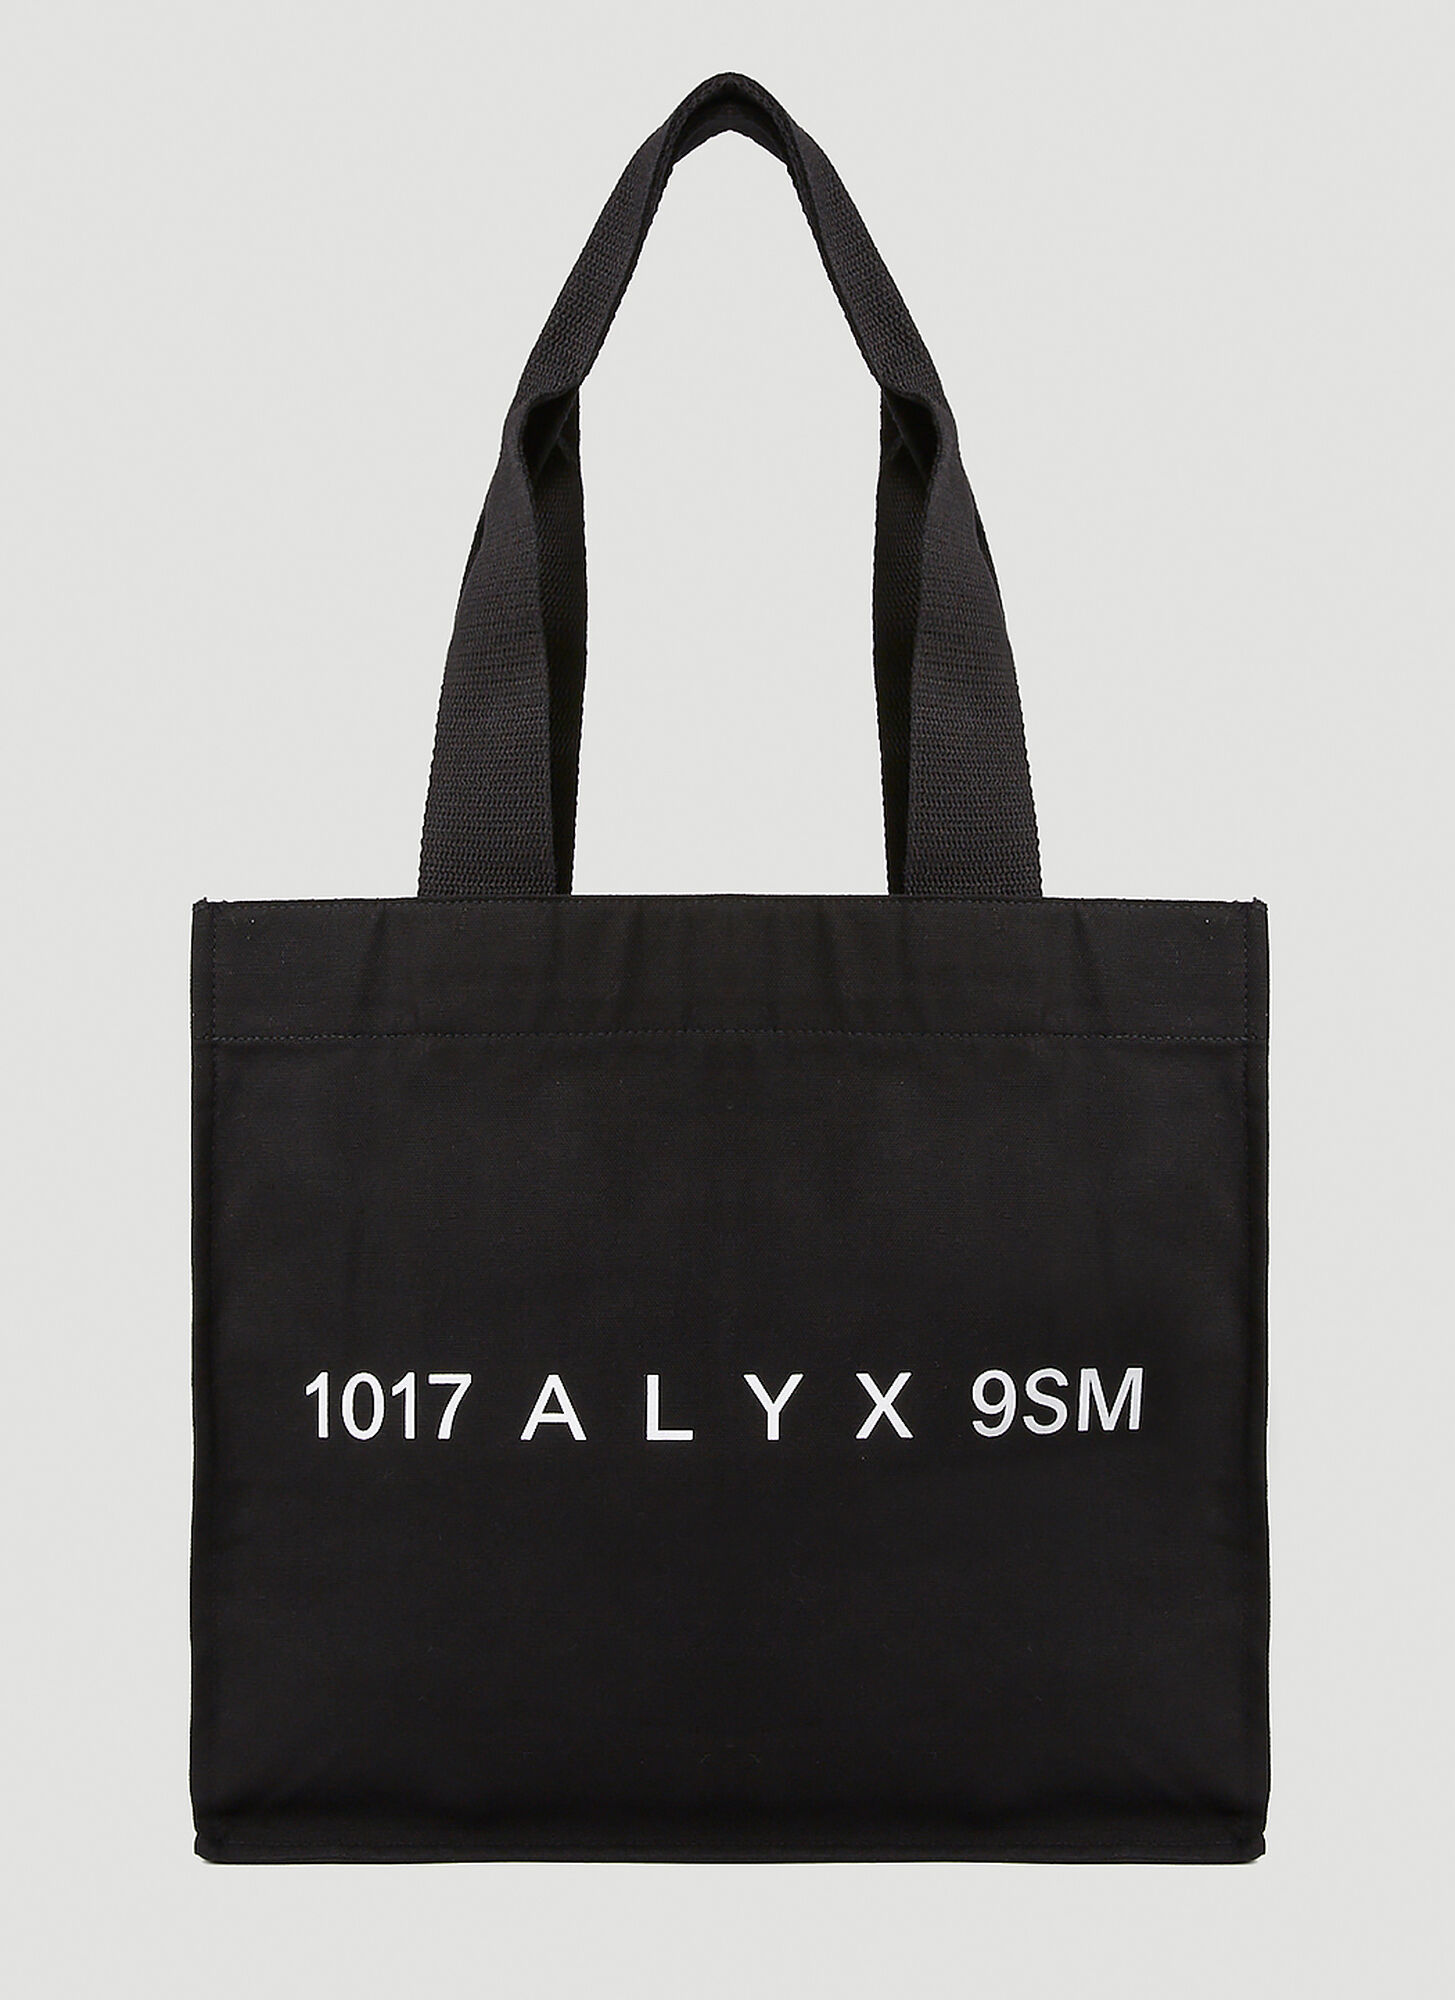 ALYX PEACE SIGN TOTE BAG